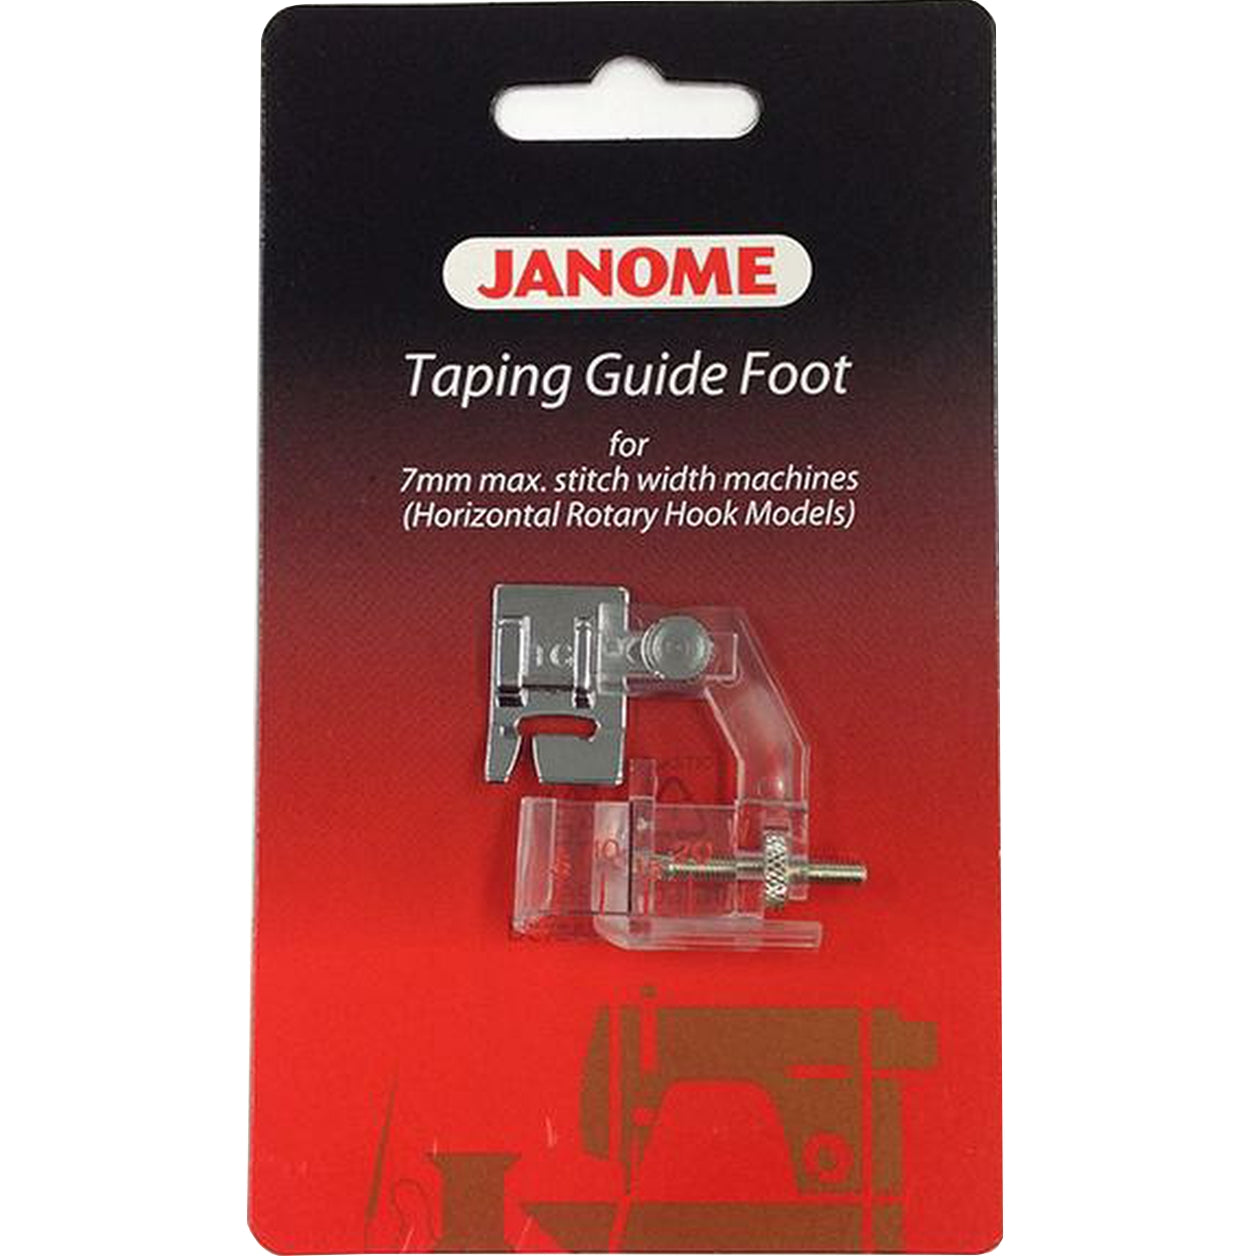 Janome Taping Guide Foot / adjustable bias binder from Jaycotts Sewing Supplies